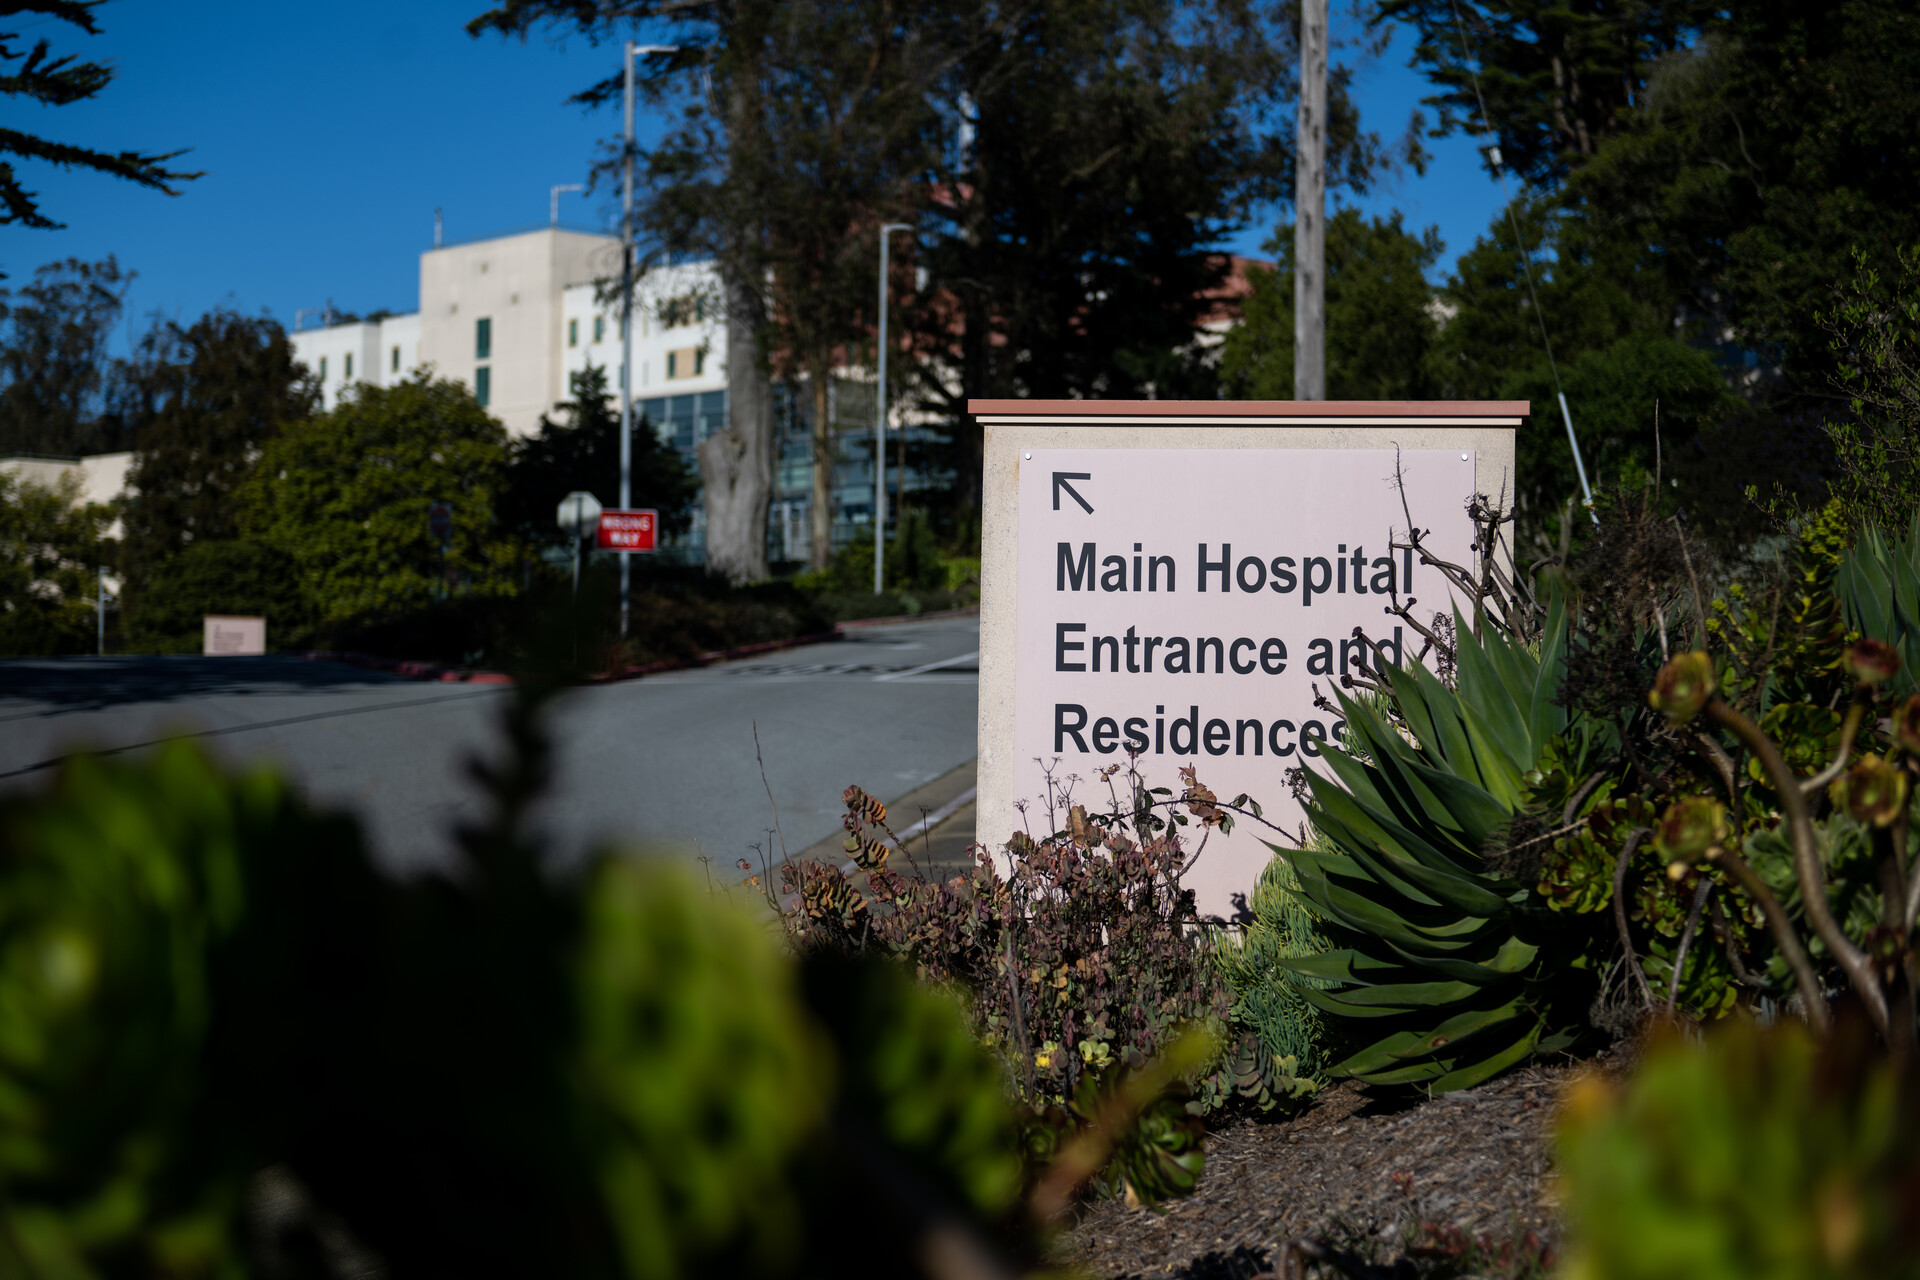 The entryway to a hospital driveway with a sign that reads, "Main Hospital Entrance and Residences."